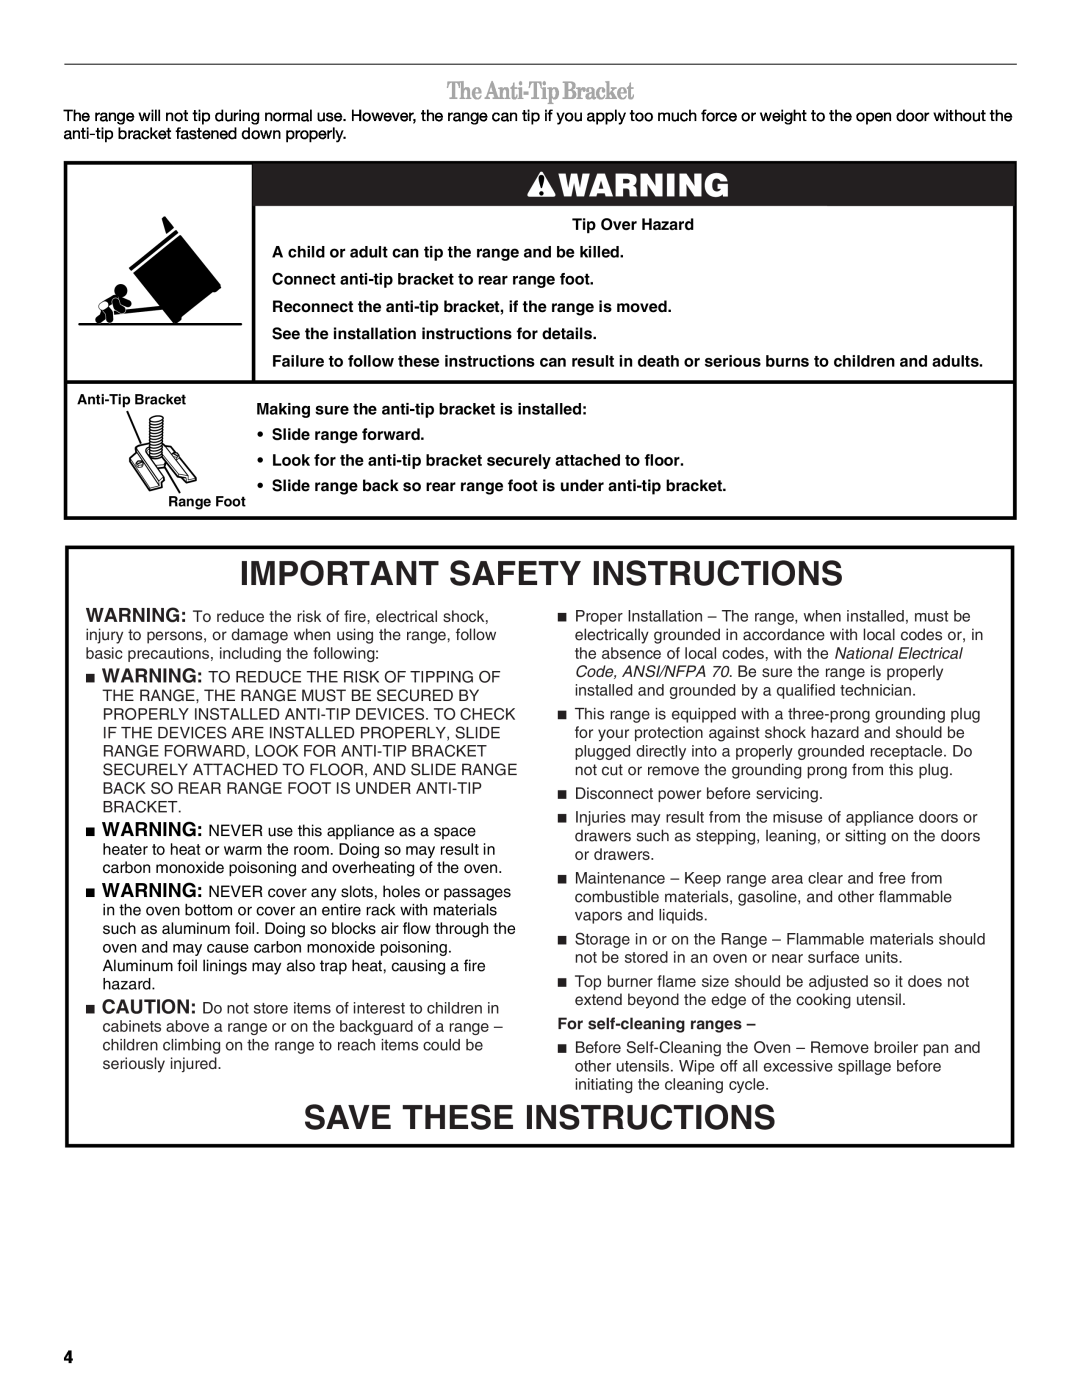 Whirlpool W10200947A TheAnti-TipBracket, Important Safety Instructions, Save These Instructions, For self-cleaning ranges 